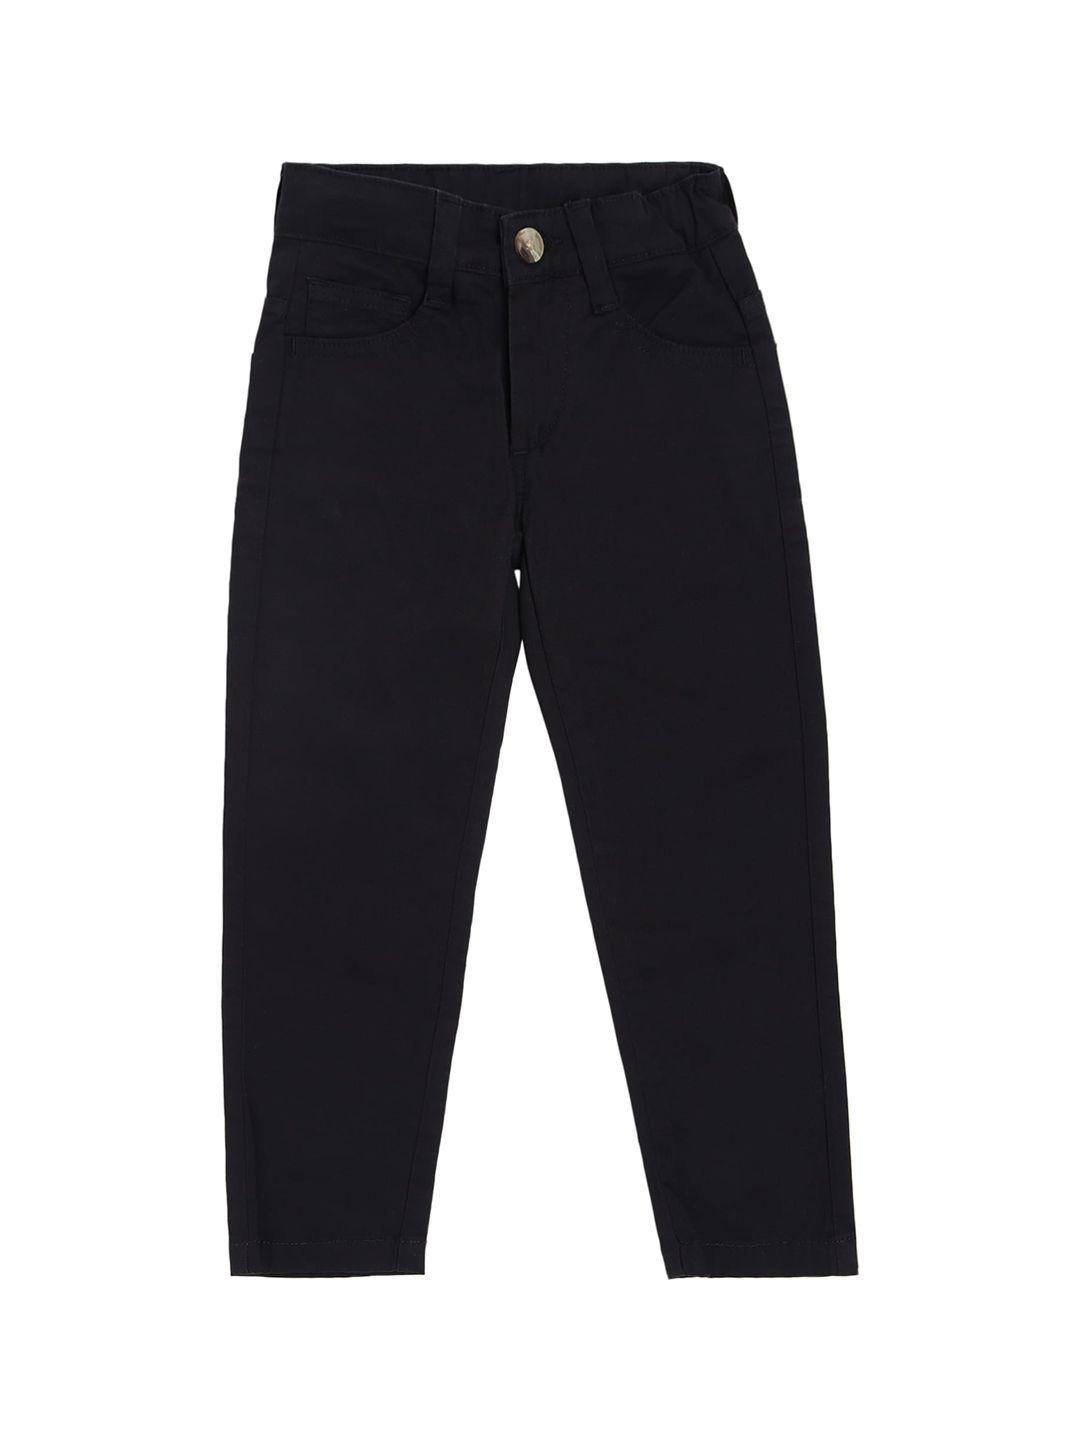 cantabil boys cotton chinos trousers